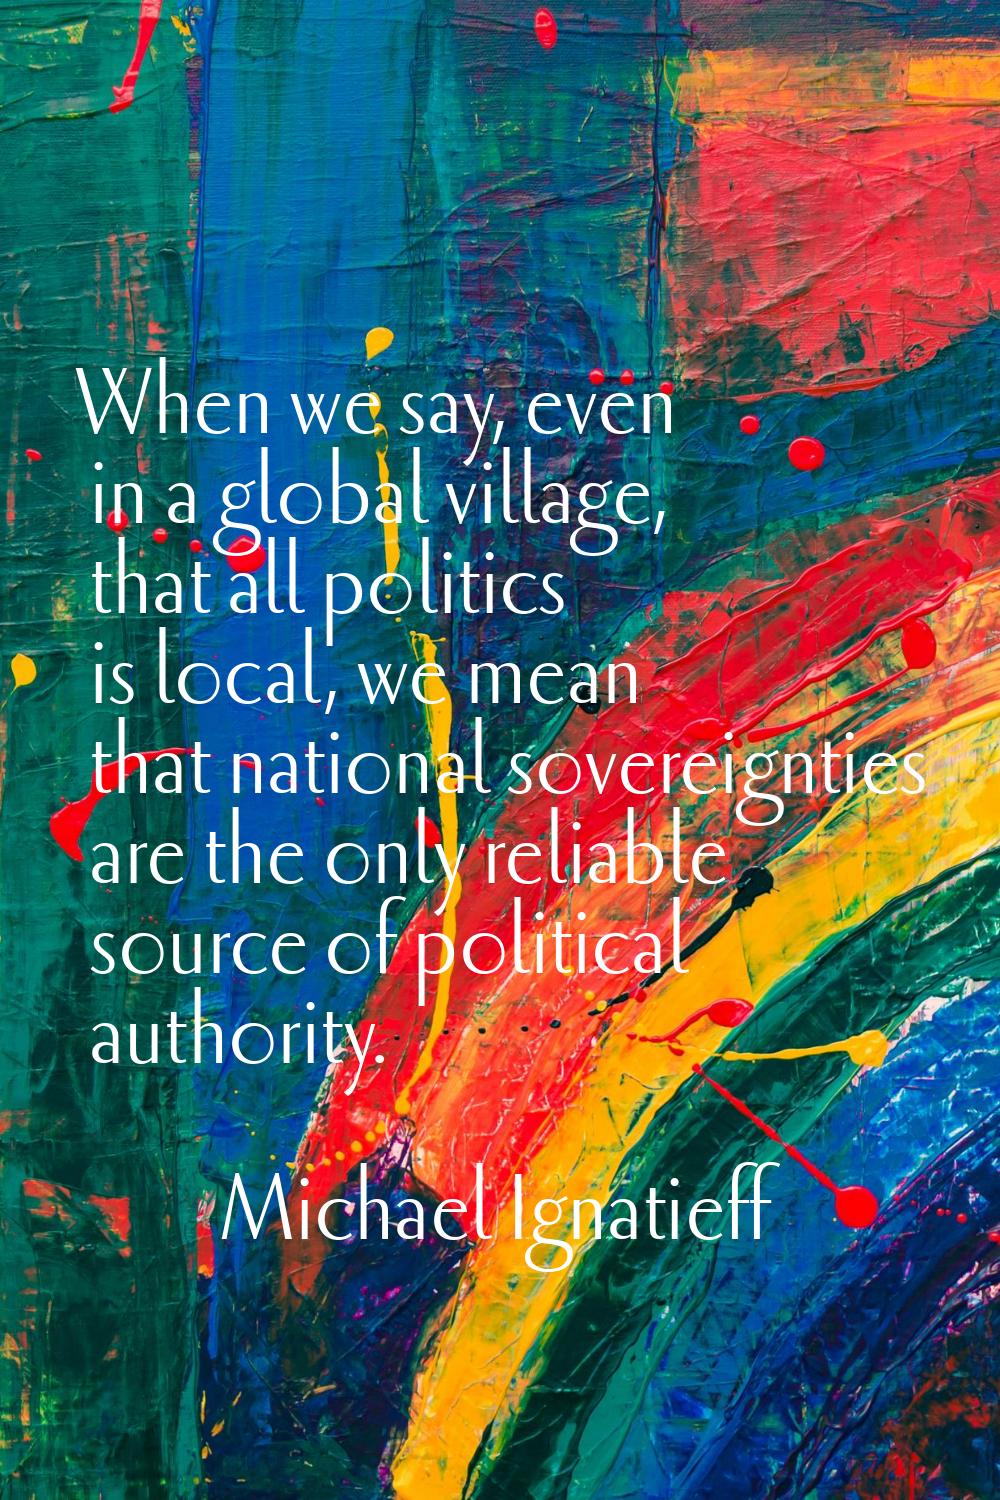 When we say, even in a global village, that all politics is local, we mean that national sovereignt